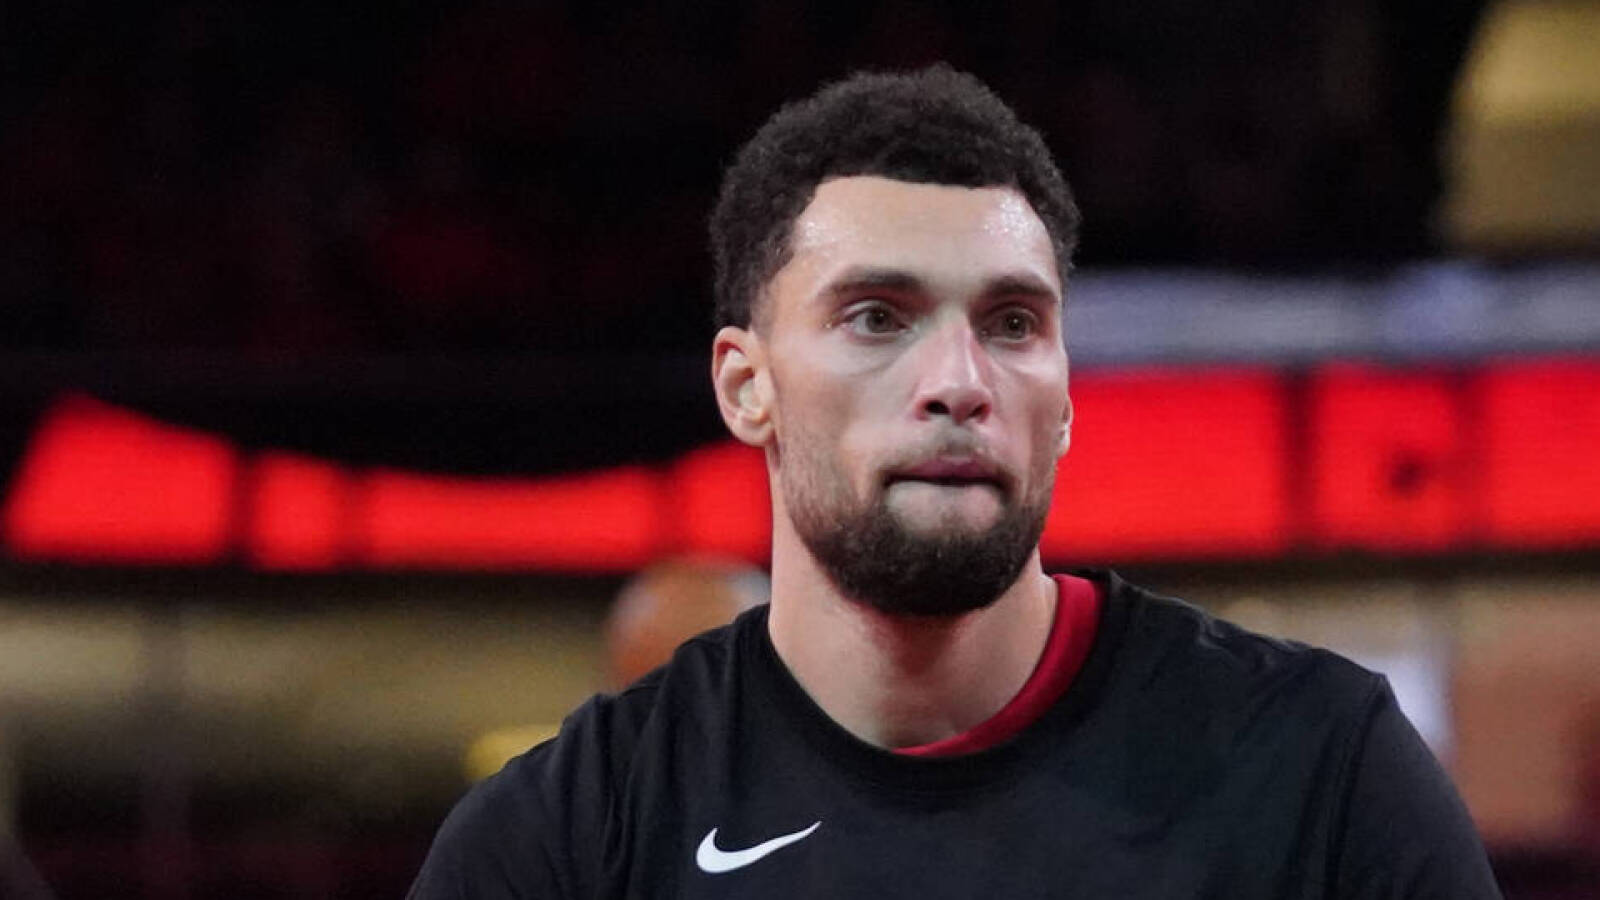 Why the Heat should avoid trading for Bulls' Zach LaVine